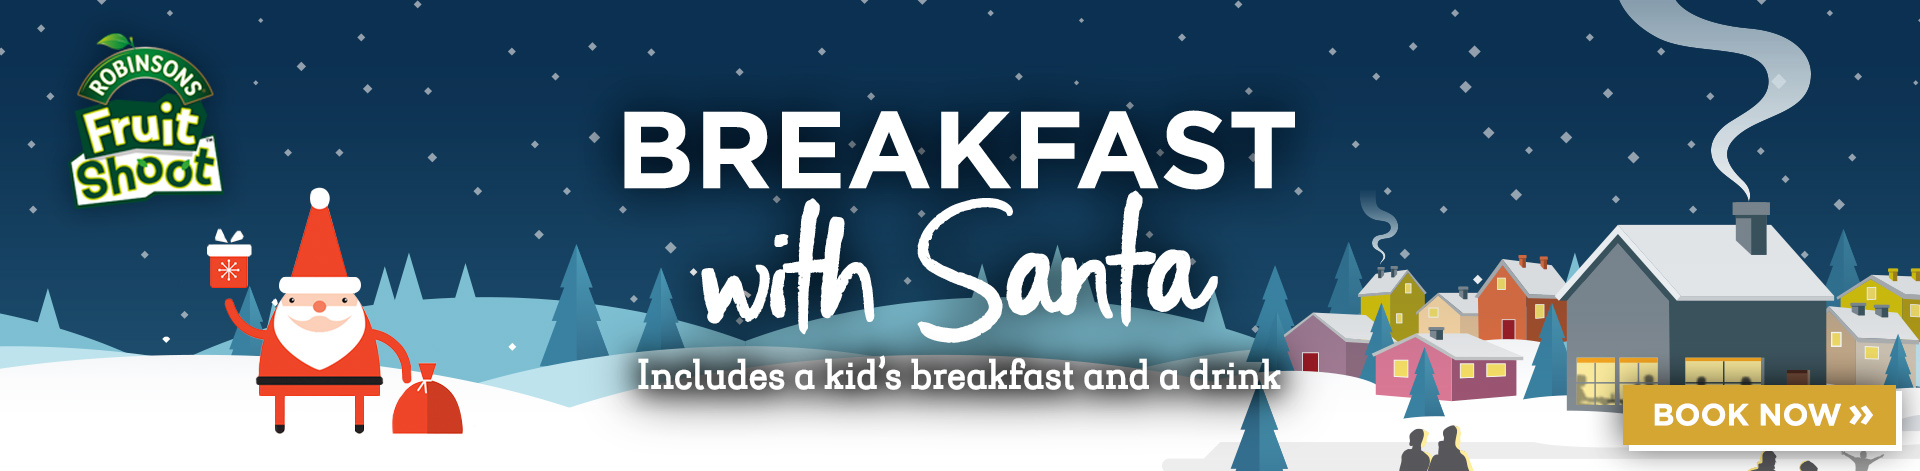 Breakfast with Santa menu at The Bells of St Marys